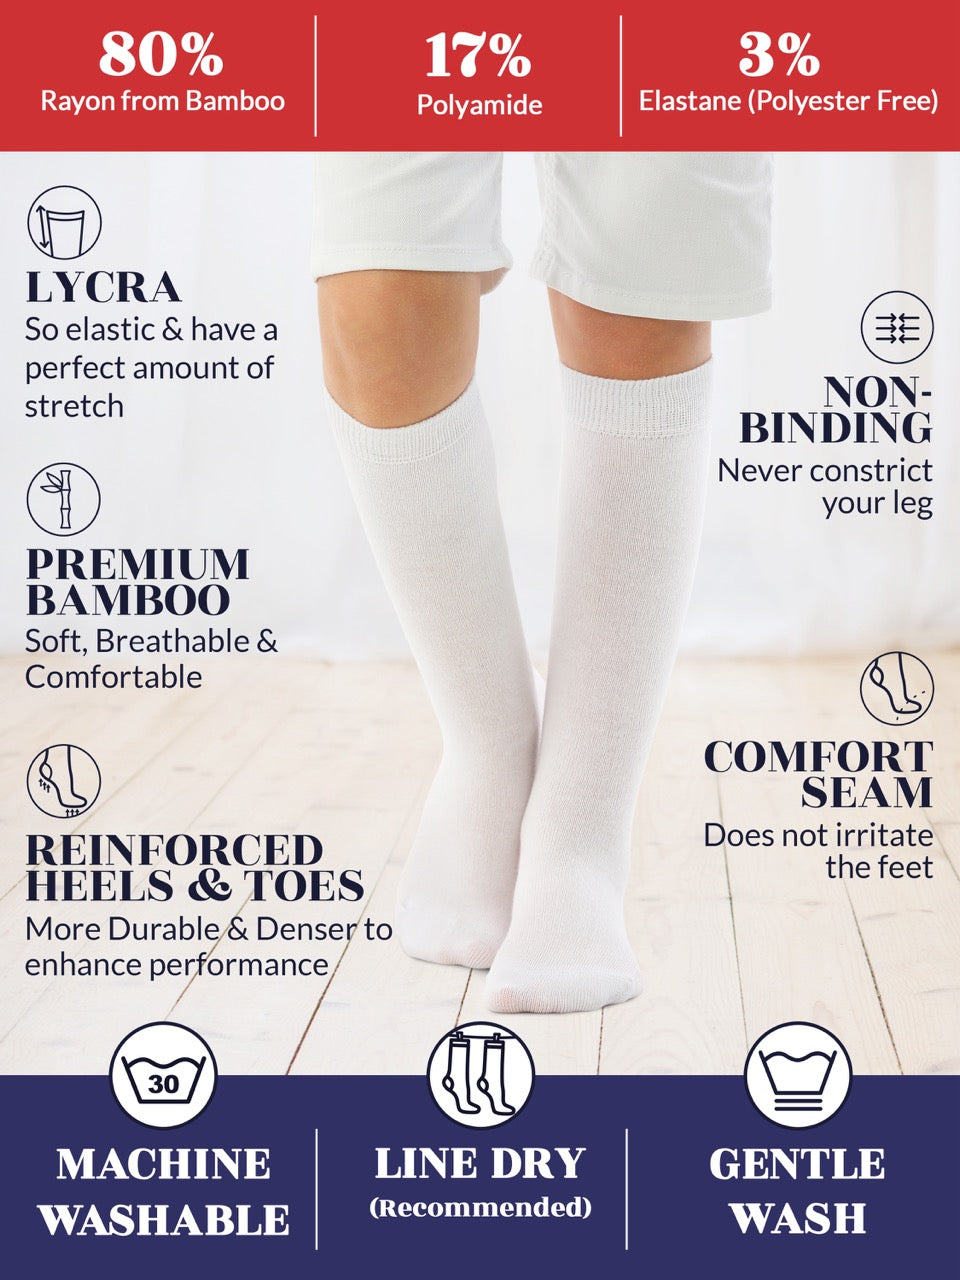 Experience the ultimate comfort and style with Hugh Ugoli Kids Bamboo School Socks. These white socks perfect for school or everyday wear, our high-quality knee-high socks meet uniform standards while reducing blisters and staying in place. Available in four sizes for children aged 3-14 years